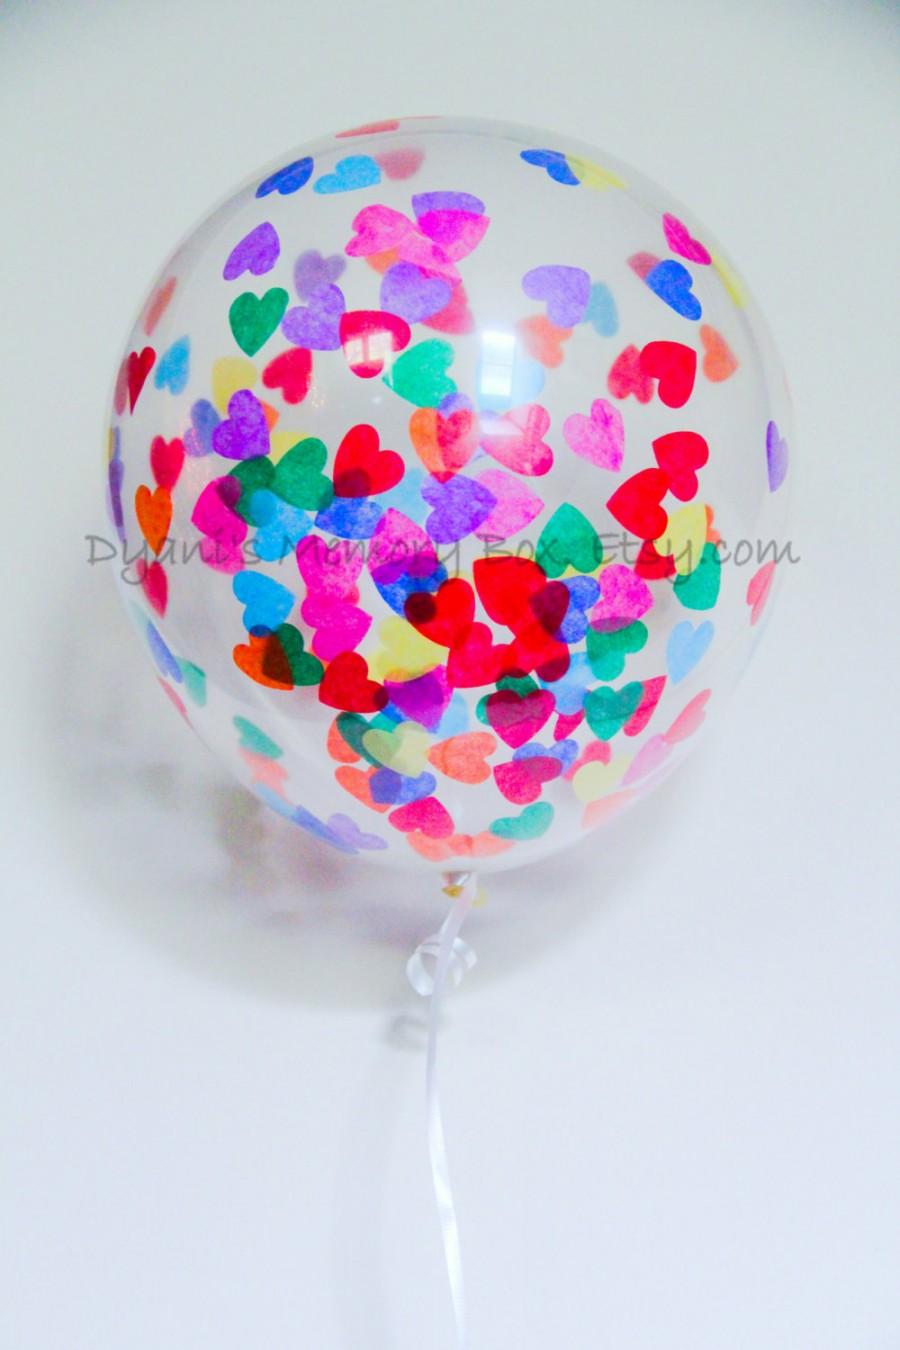 Wedding - Set of 6 Clear Heart Confetti-Filled Balloons / choose your colors / Biodegradable Latex Balloons